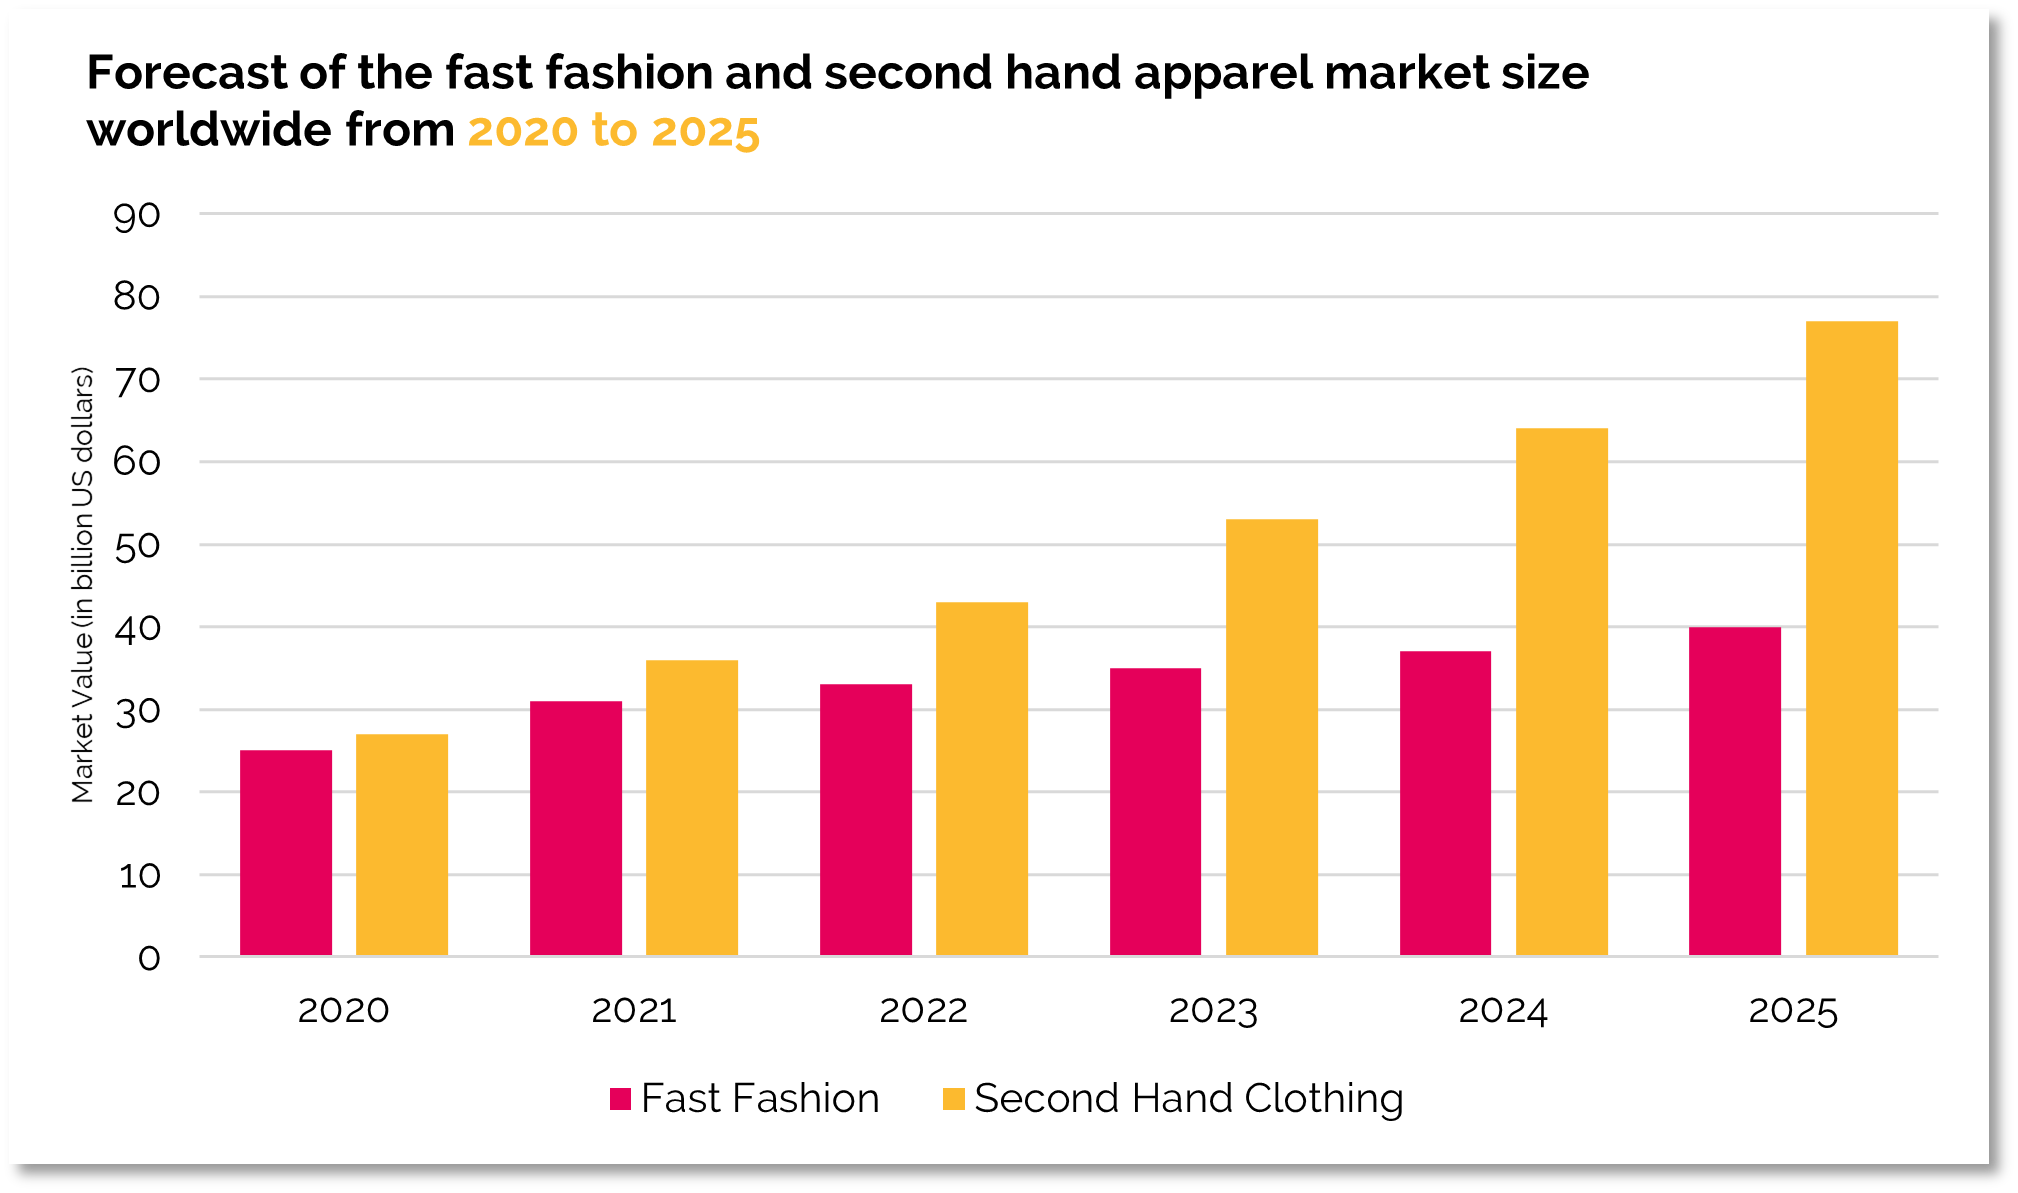 Sustainable versus fast fashion - forecast of fast fashion versus sustainable clothing growth 2020-2025